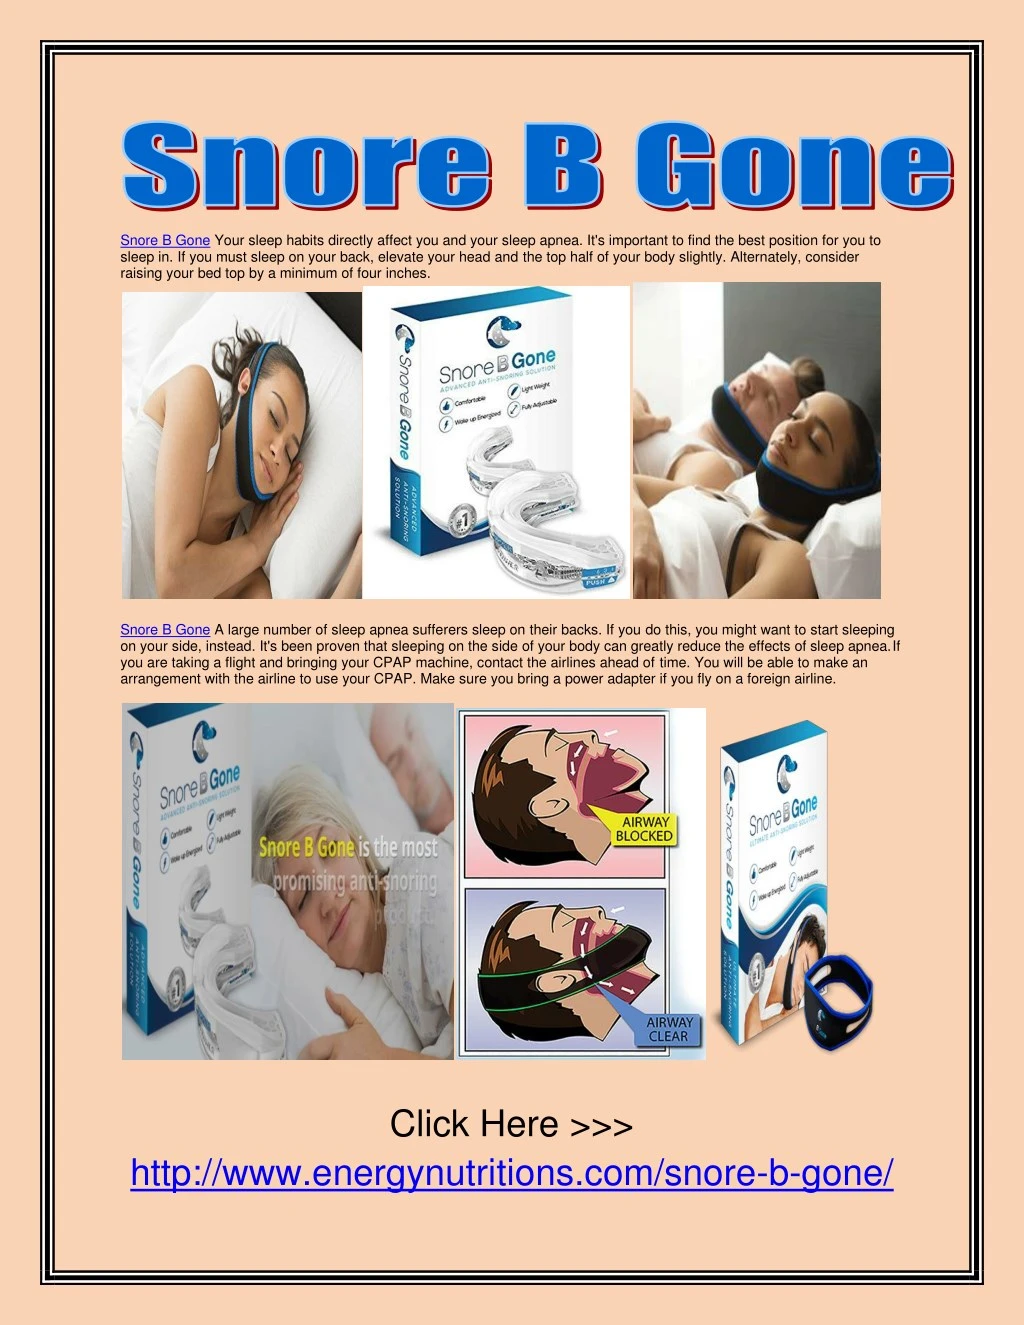 snore b gone your sleep habits directly affect